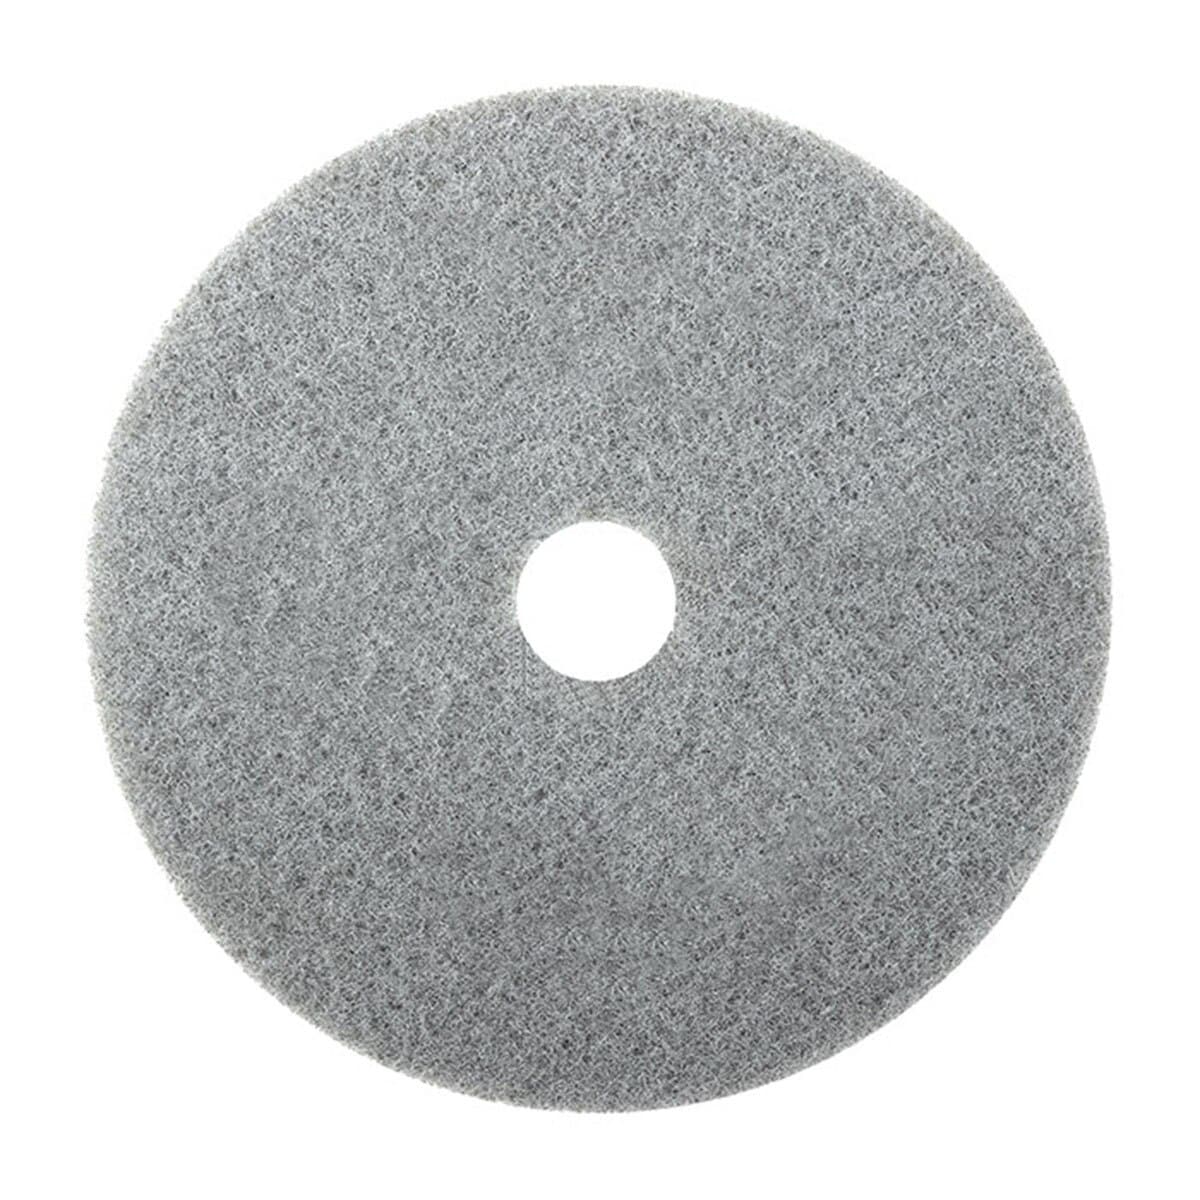 HTC Twister Pads - Gray - Twister Cleaning Technology